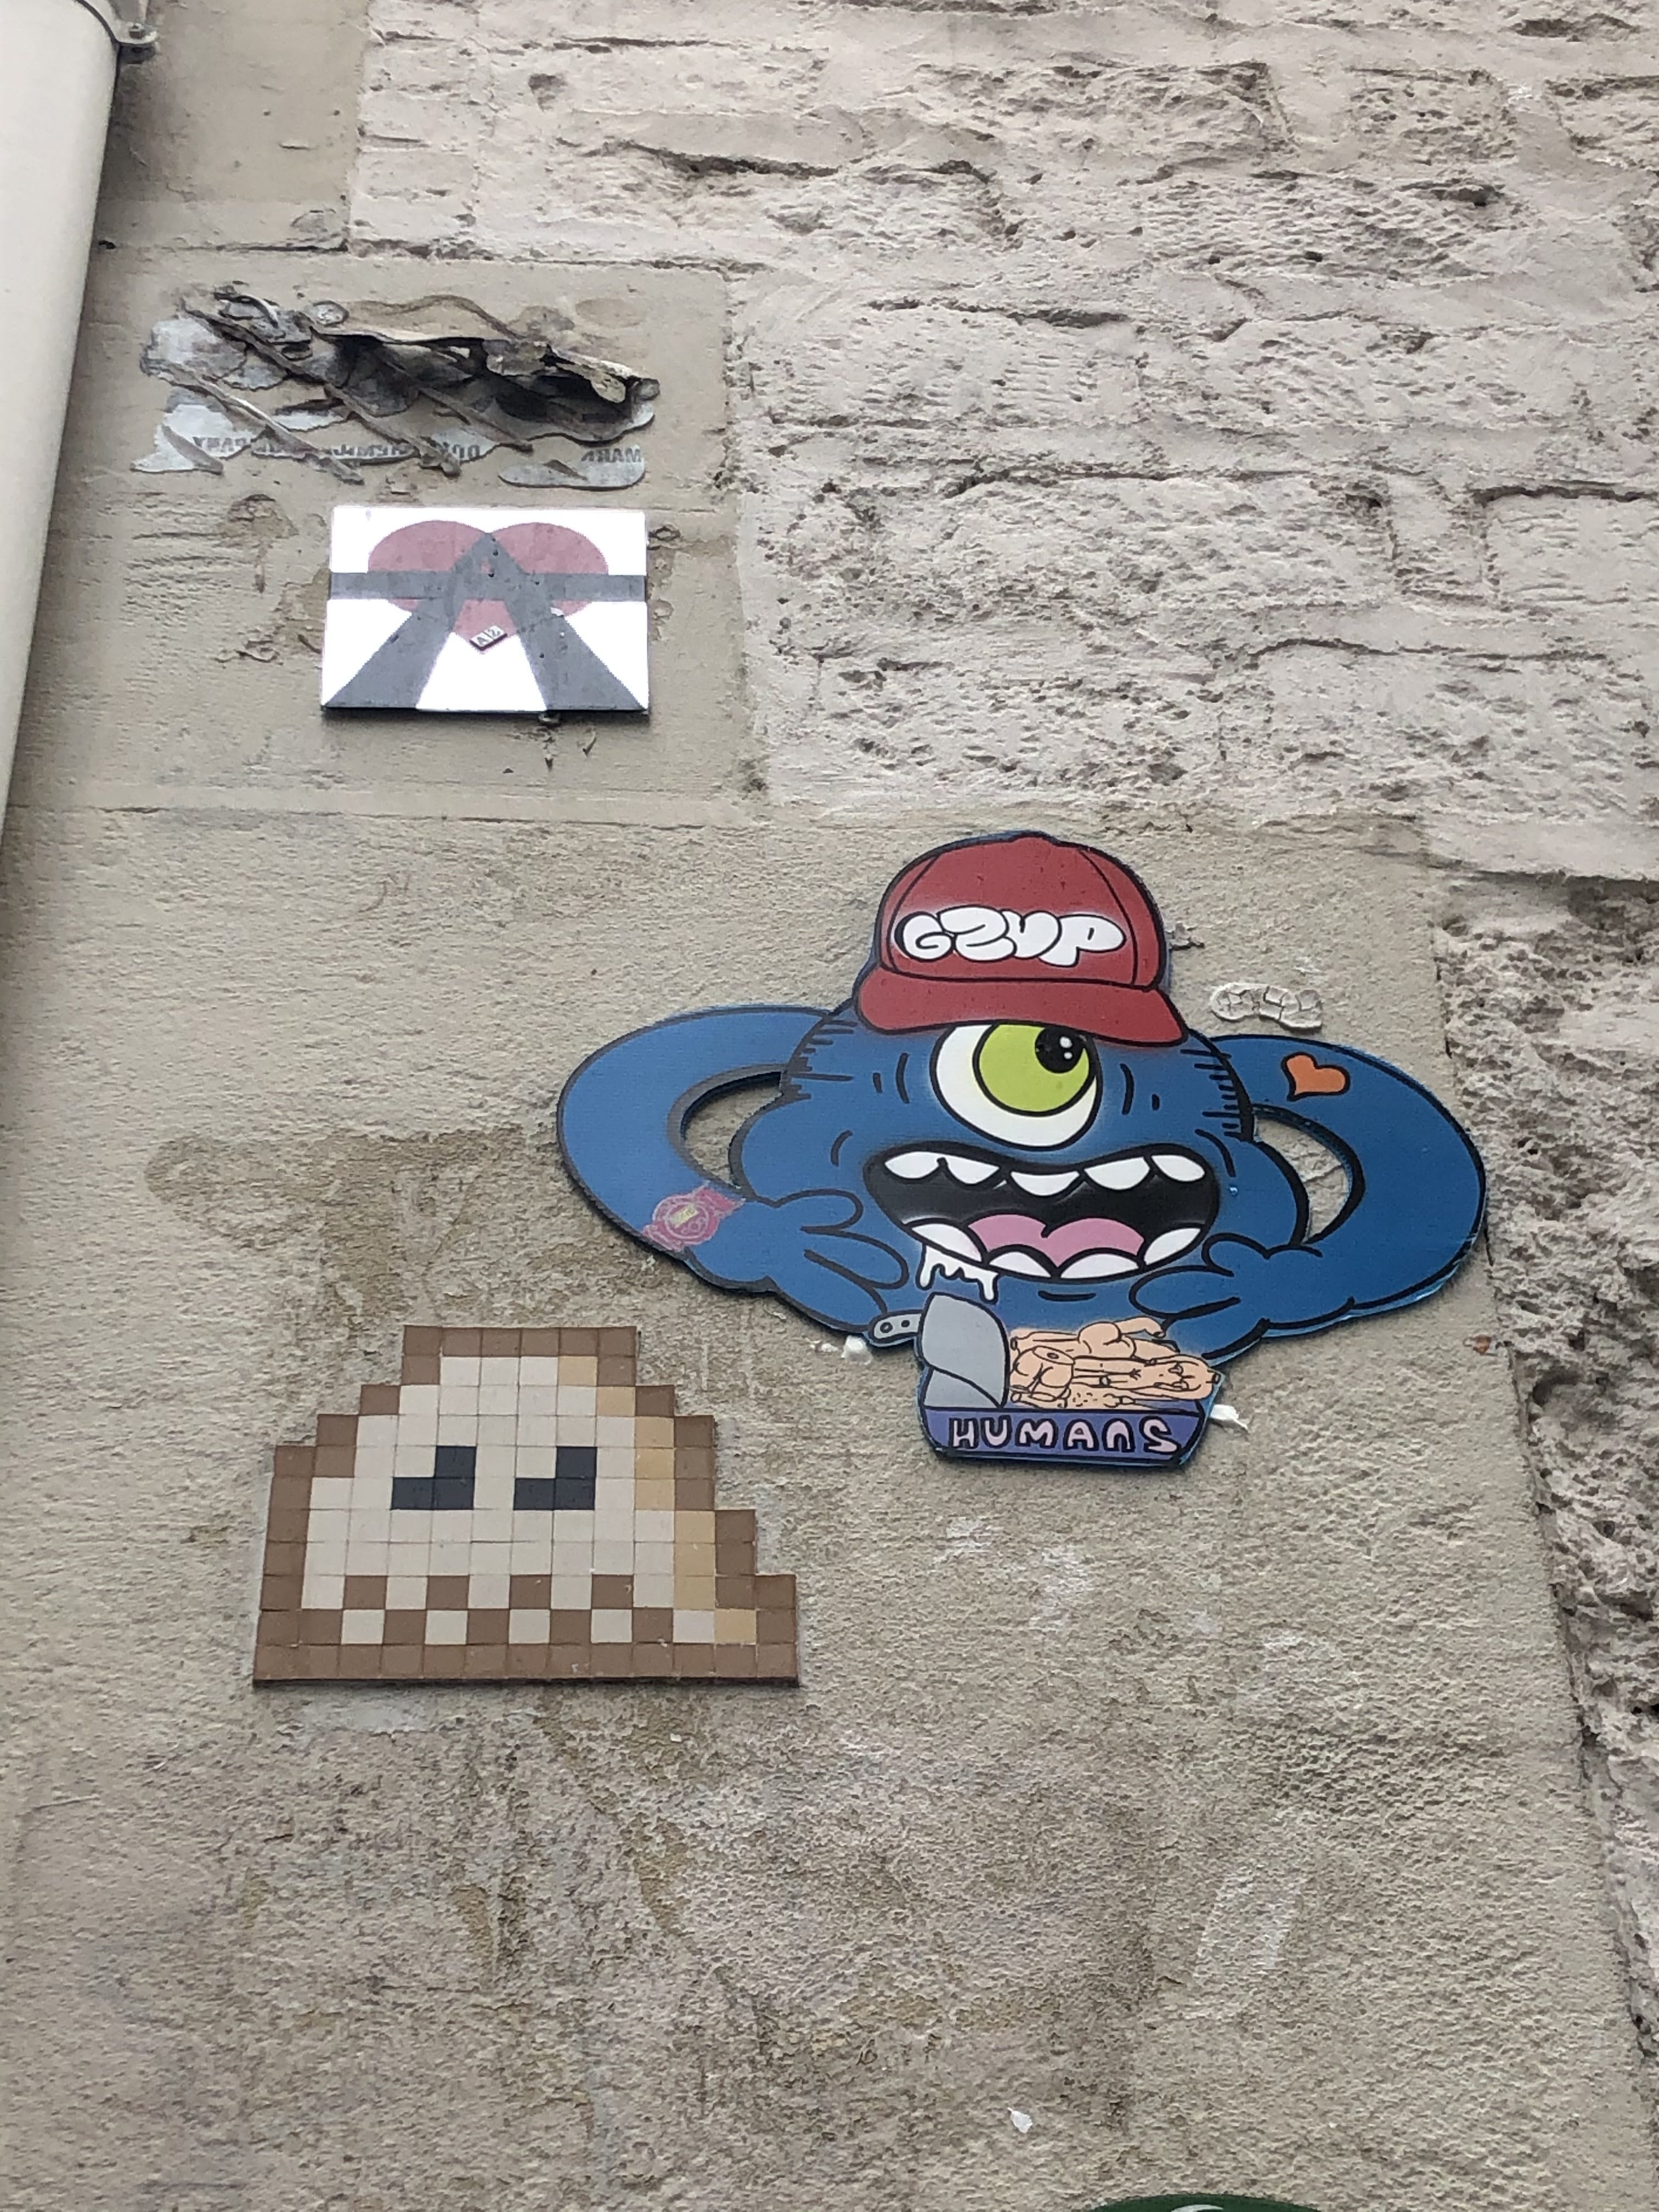 Sticking 4767 Street art A2 invader gzup by the artist Invader captured by zoula1234 in Paris France